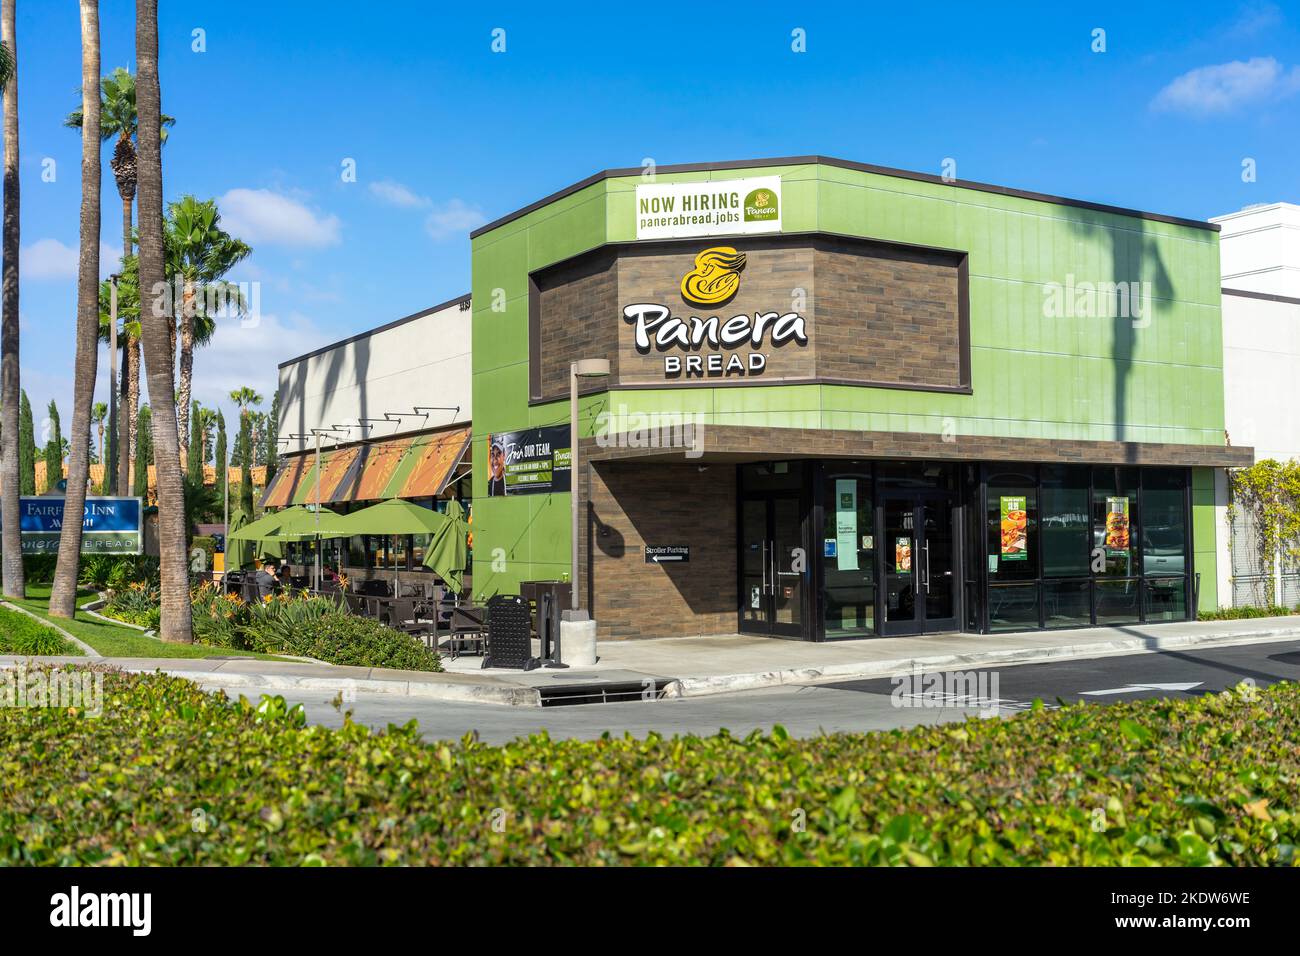 Anaheim, CA, USA – November 1, 2022: A Now Hiring banner sign at a Panera Bread restaurant located on Harbor Blvd in Anaheim, California. Stock Photo